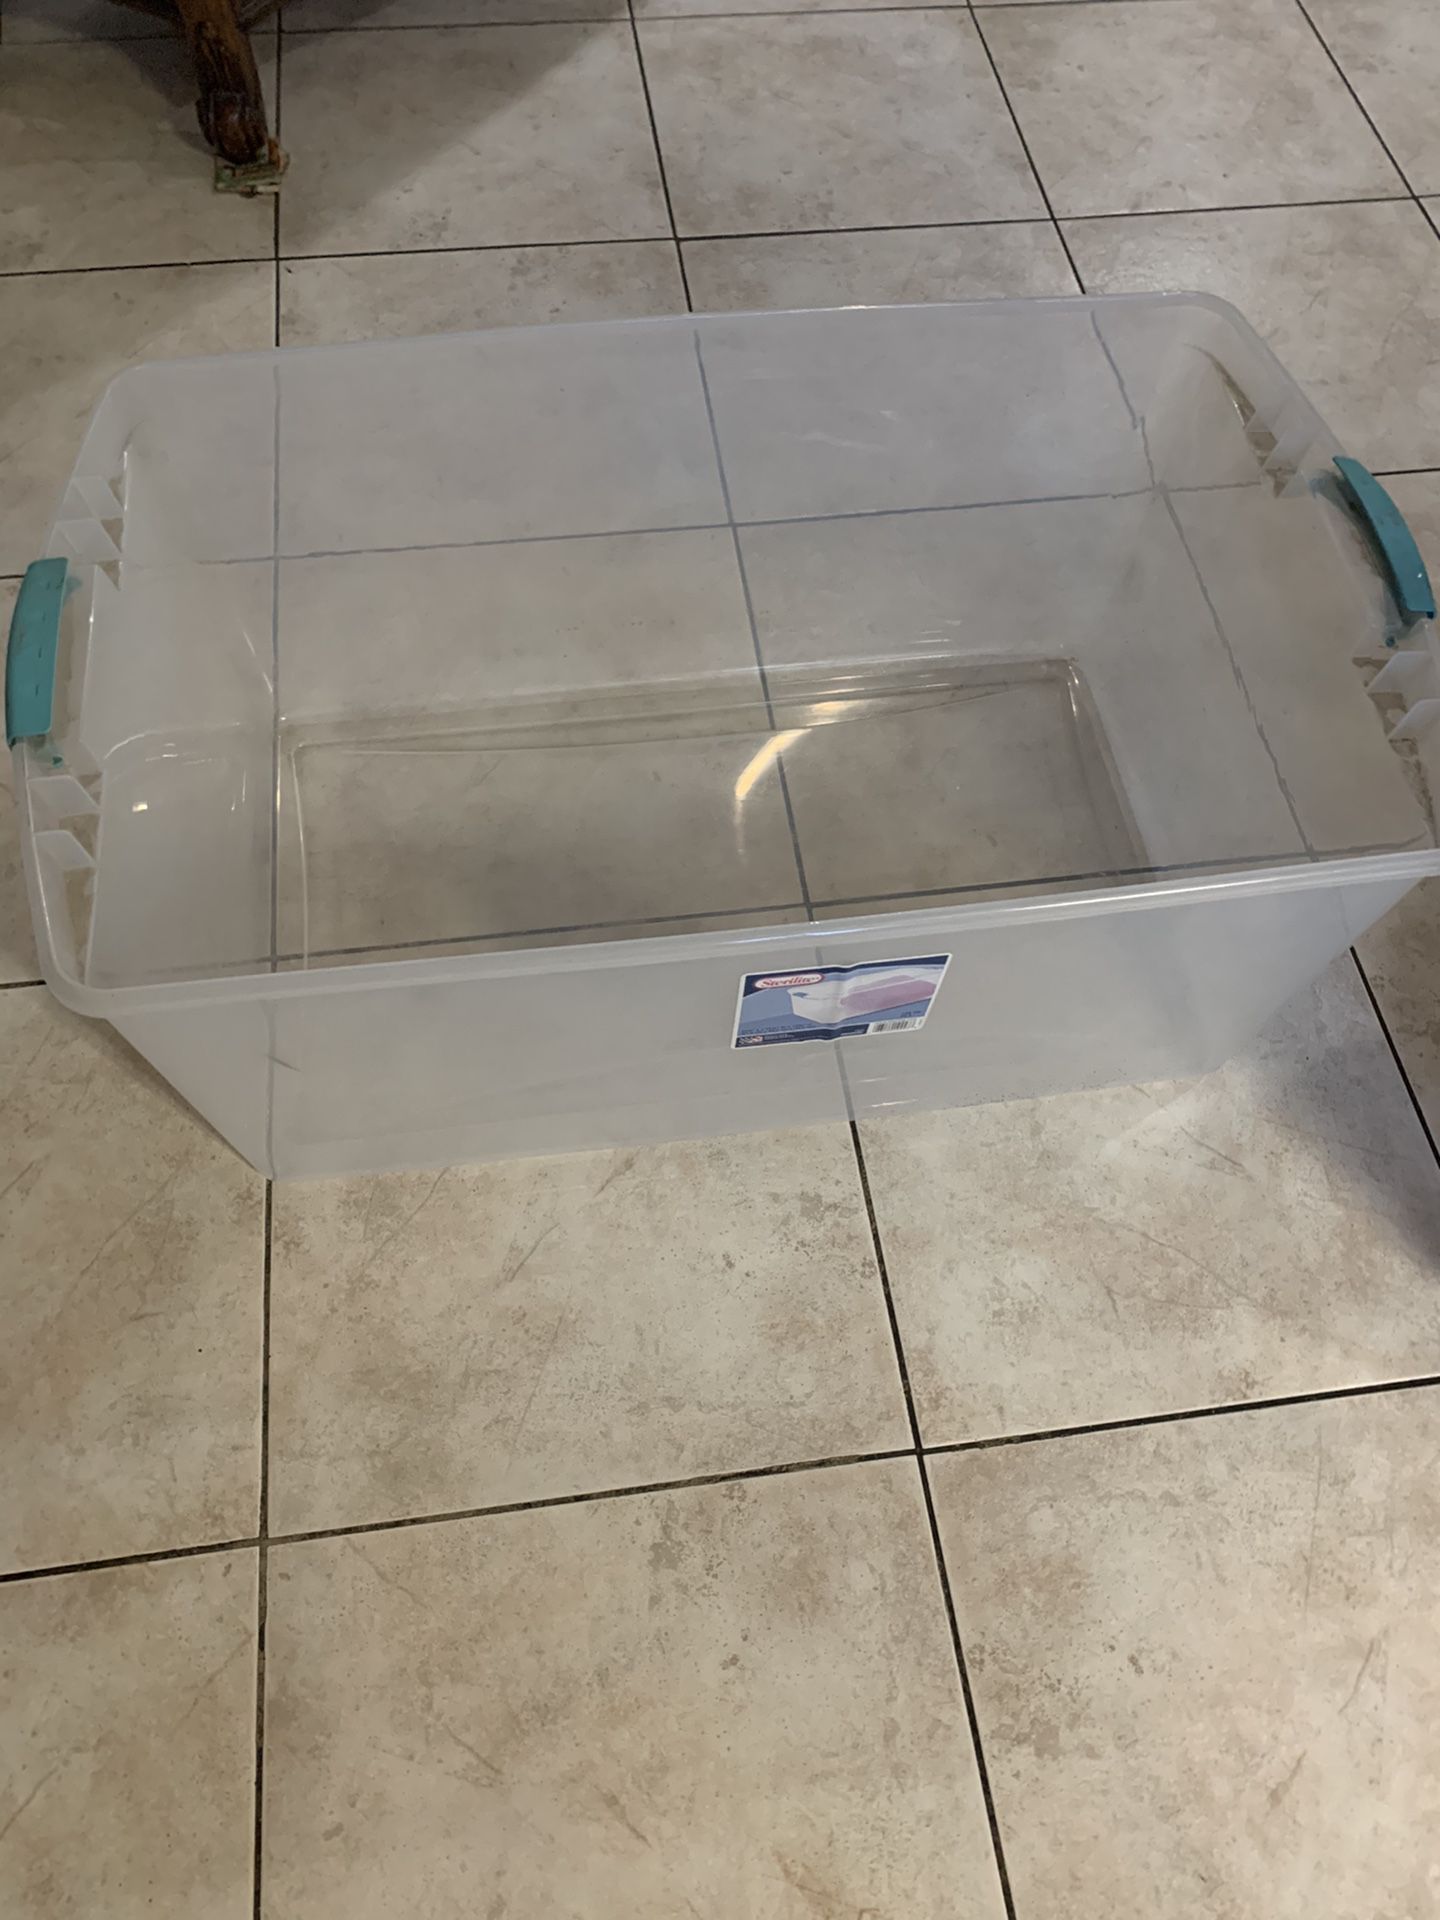 2 Storage containers (NO LIDS)